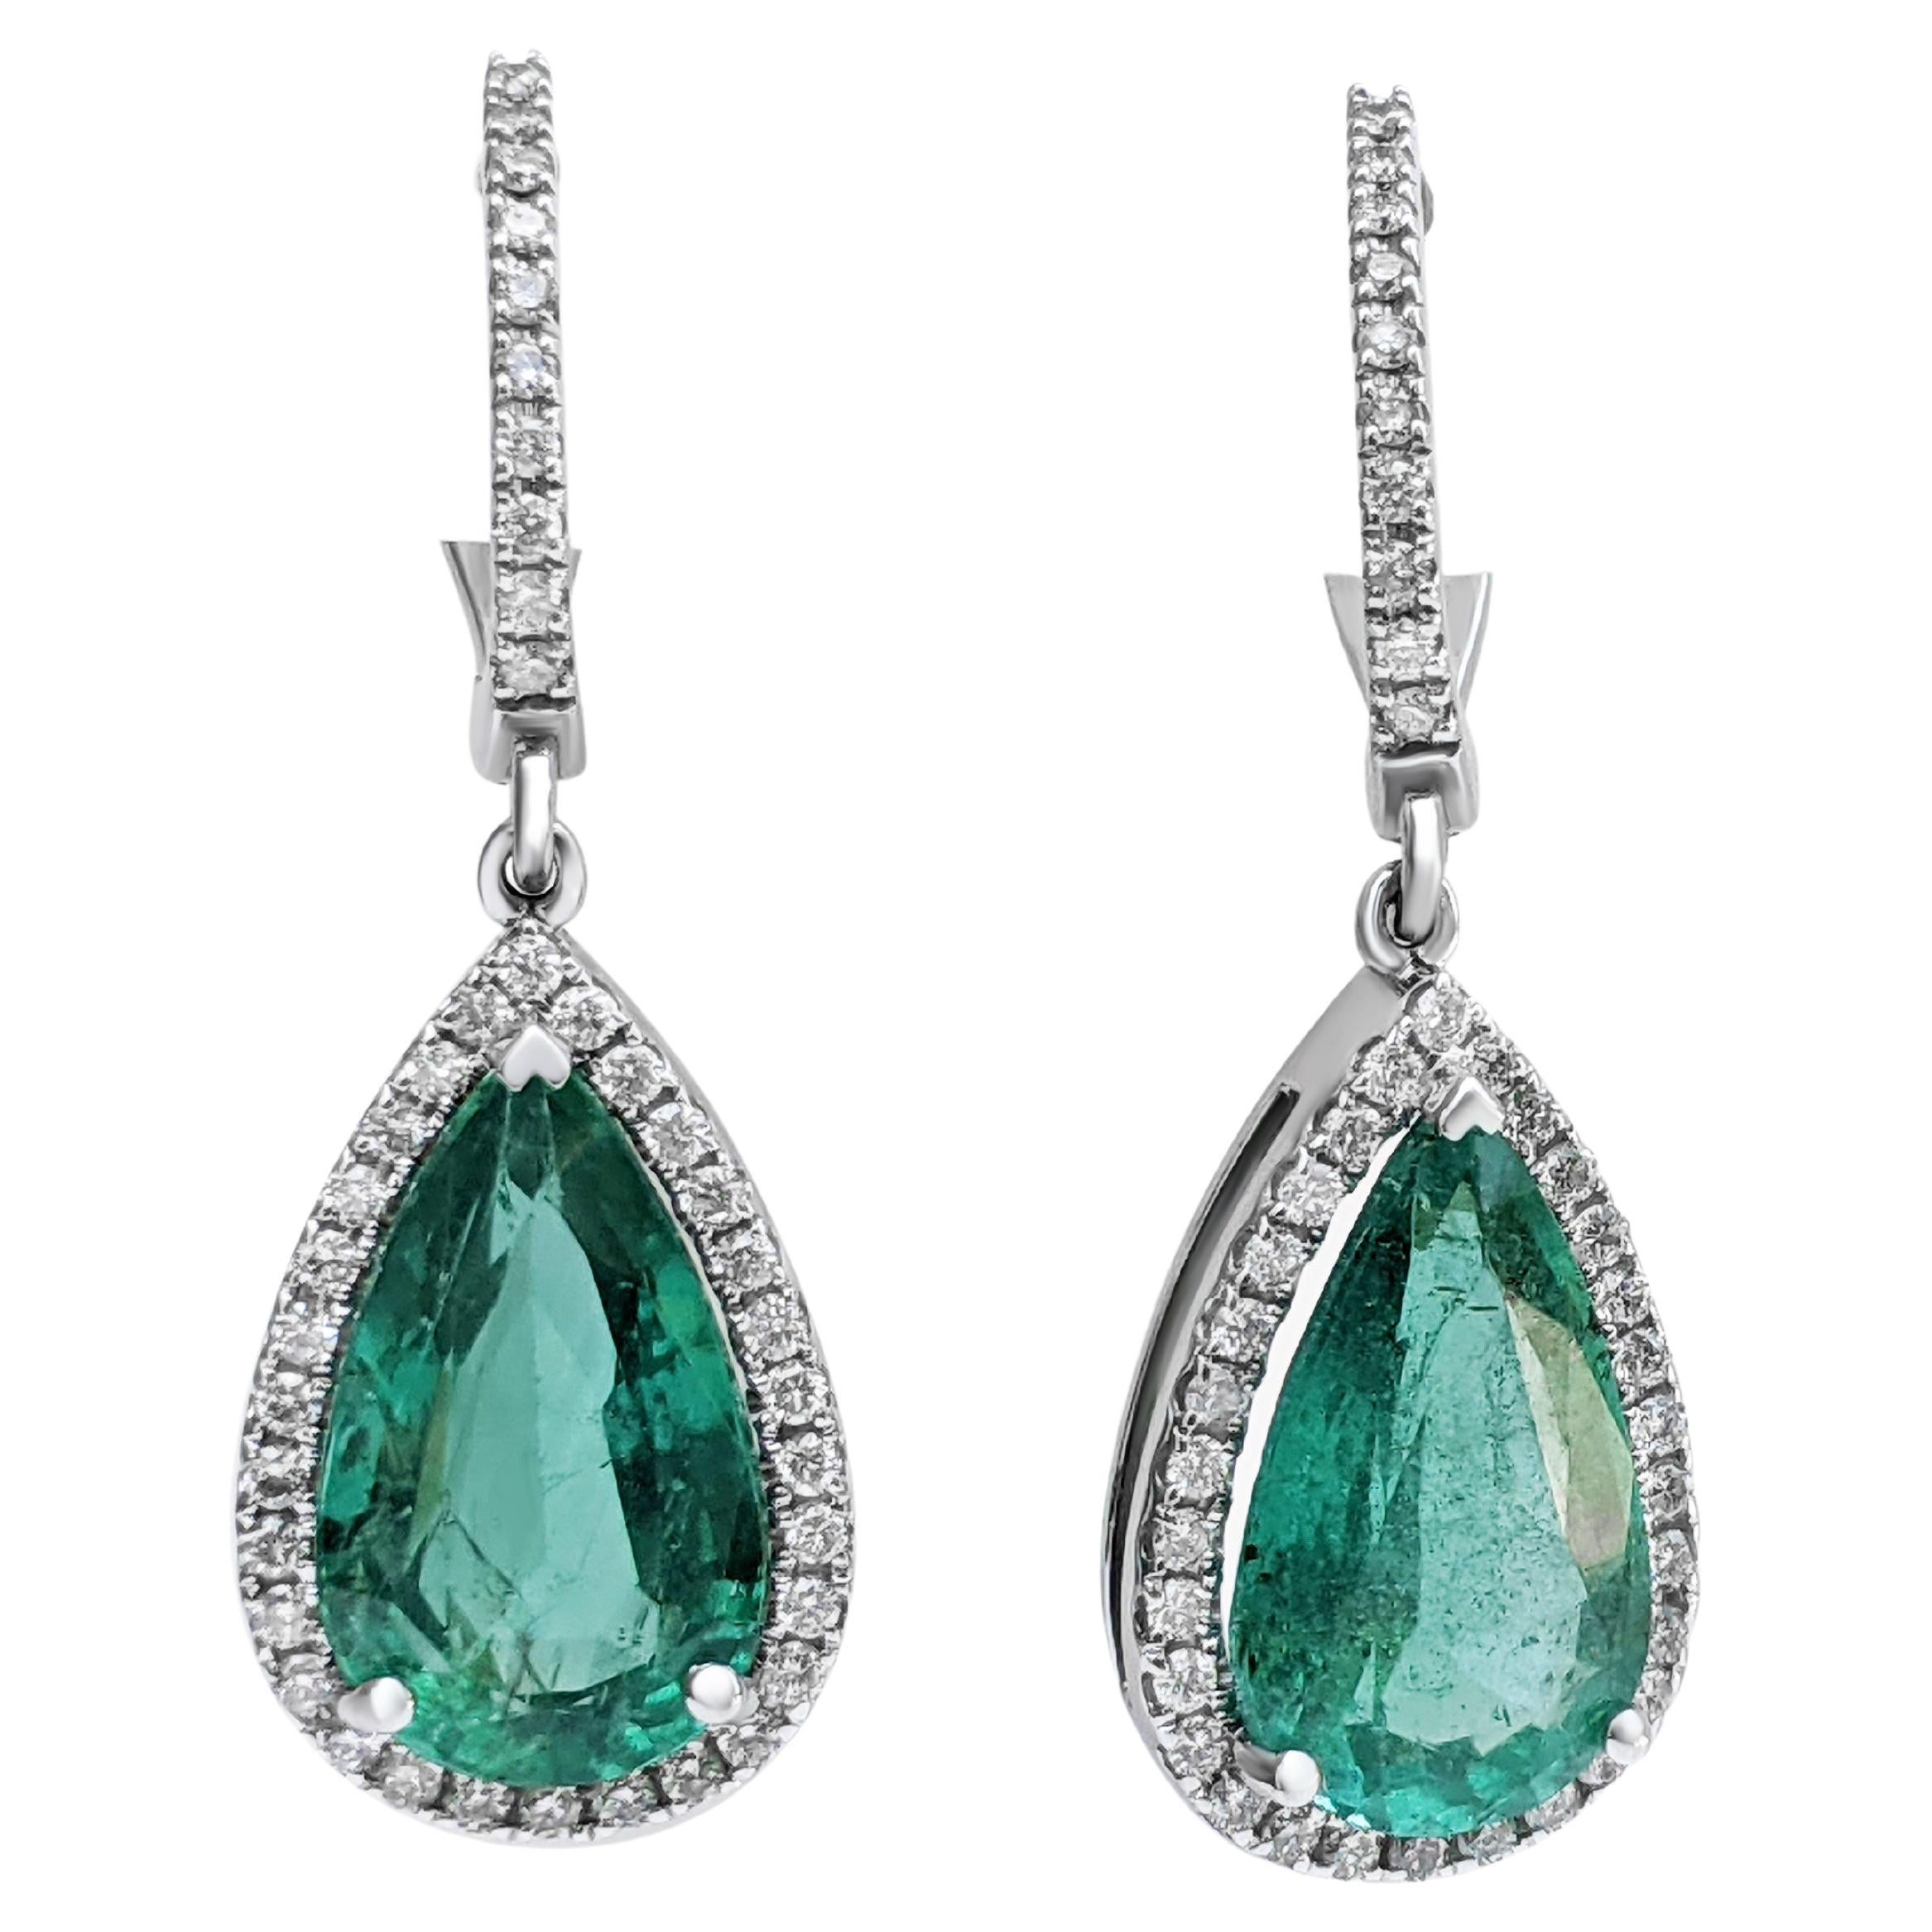 8.95 Carat Emerald and 0.75 Ct Diamonds, 18 Kt. White Gold, Earrings